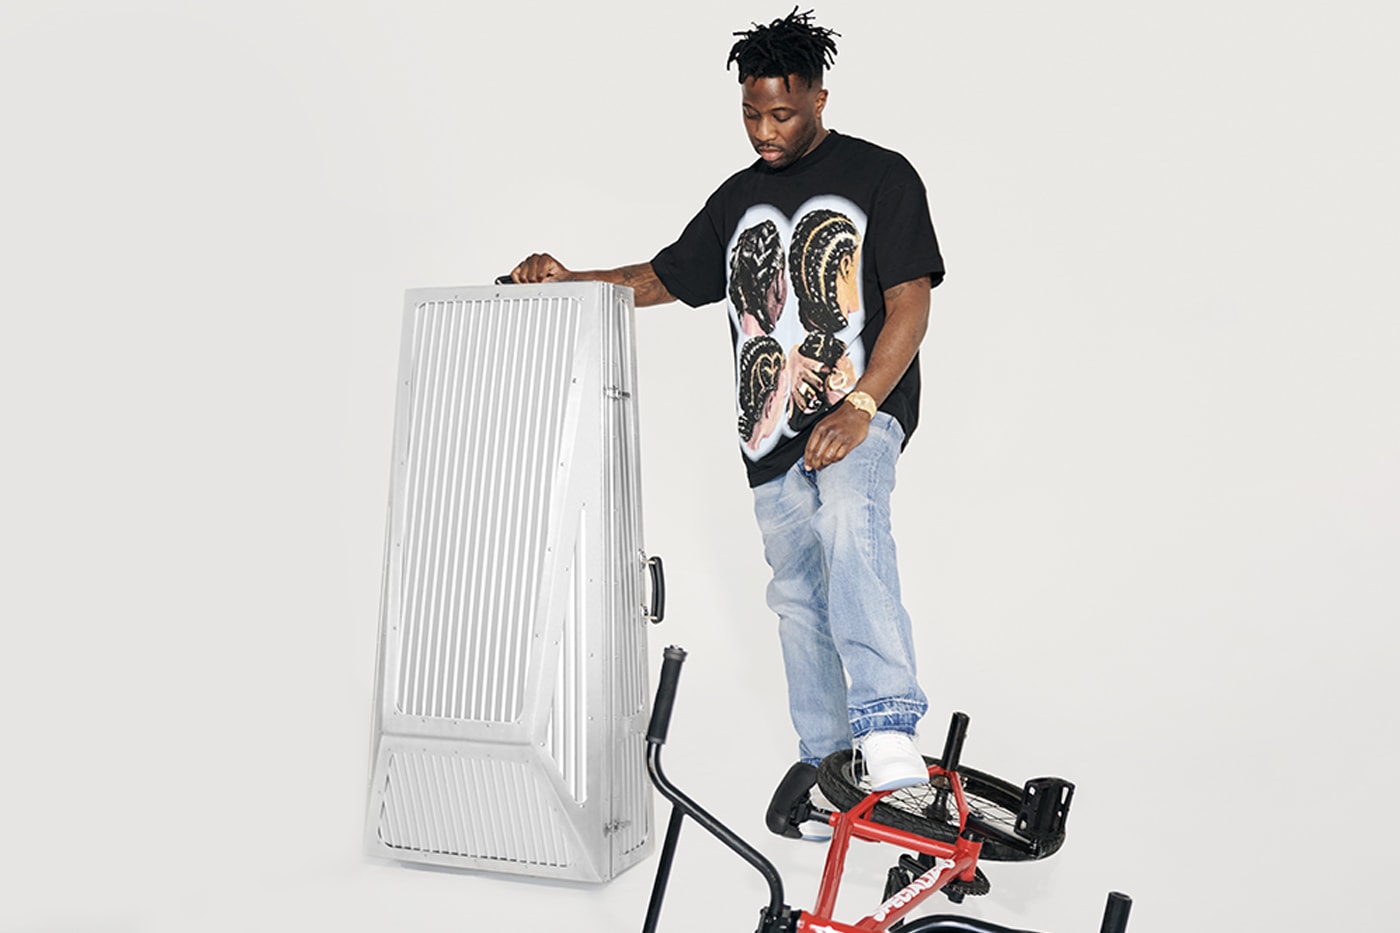 RIMOWA Unveils First-Ever Bike Case for BMX Athlete Nigel Sylvester custom coneptual piece modern sport case early 80s atelier durable aluminum contemporary travel